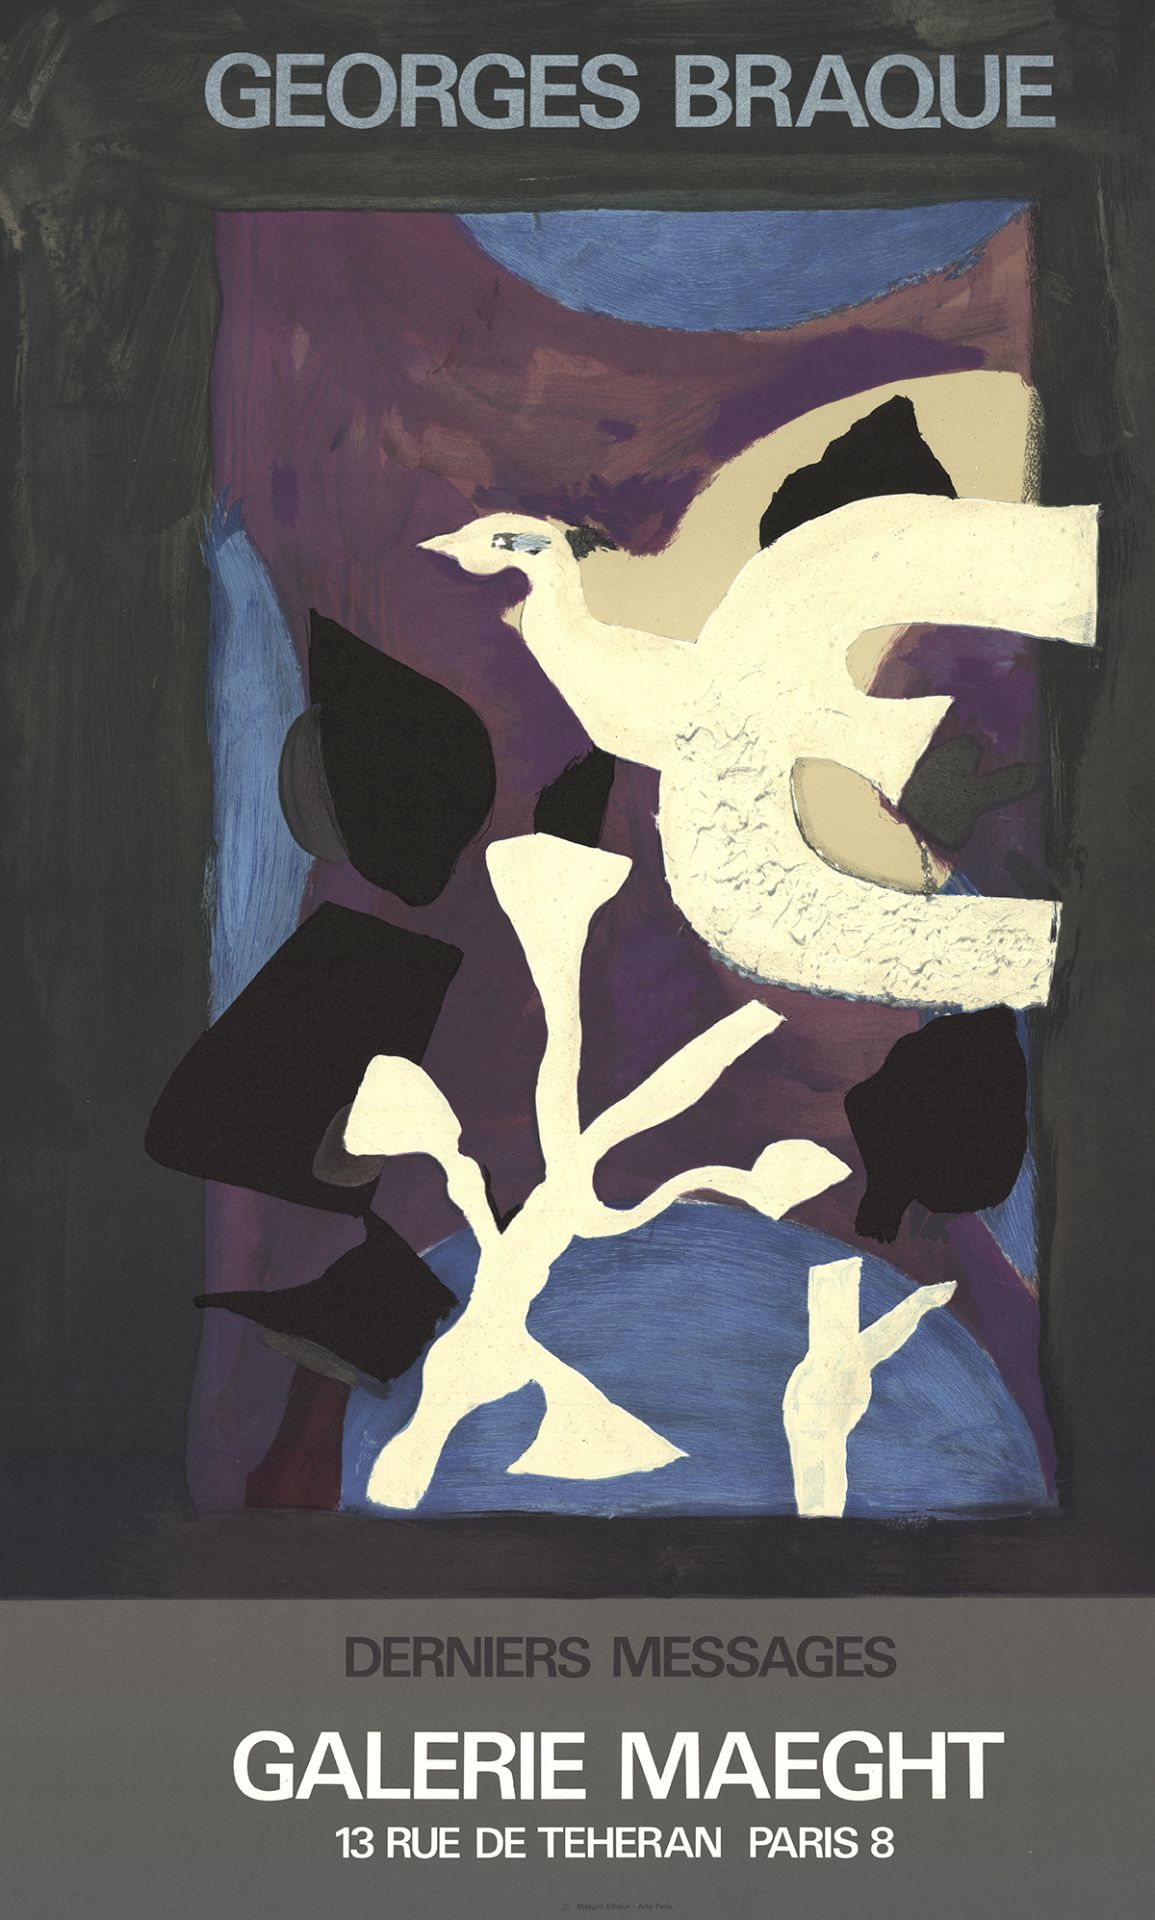 GEORGES BRAQUE - AFFICHE 2 - LIMITED EDITION LITHOGRAPH